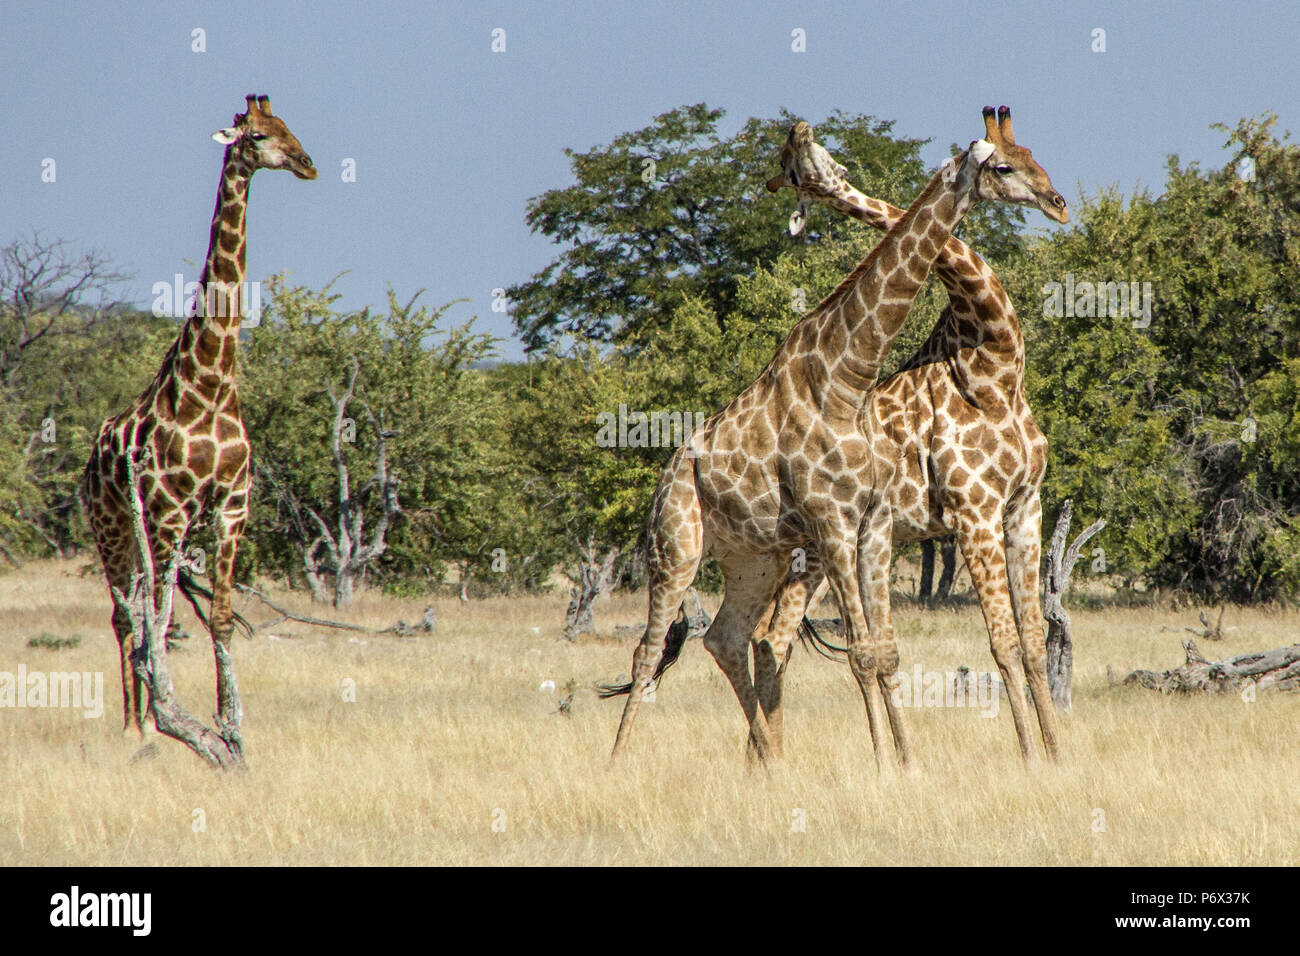 Namibian or Angolan Giraffes - Giraffa Cameloparalis Angolensis - banging heads during a mating ritual while the female looks on, in Etosha, Namibia Stock Photo